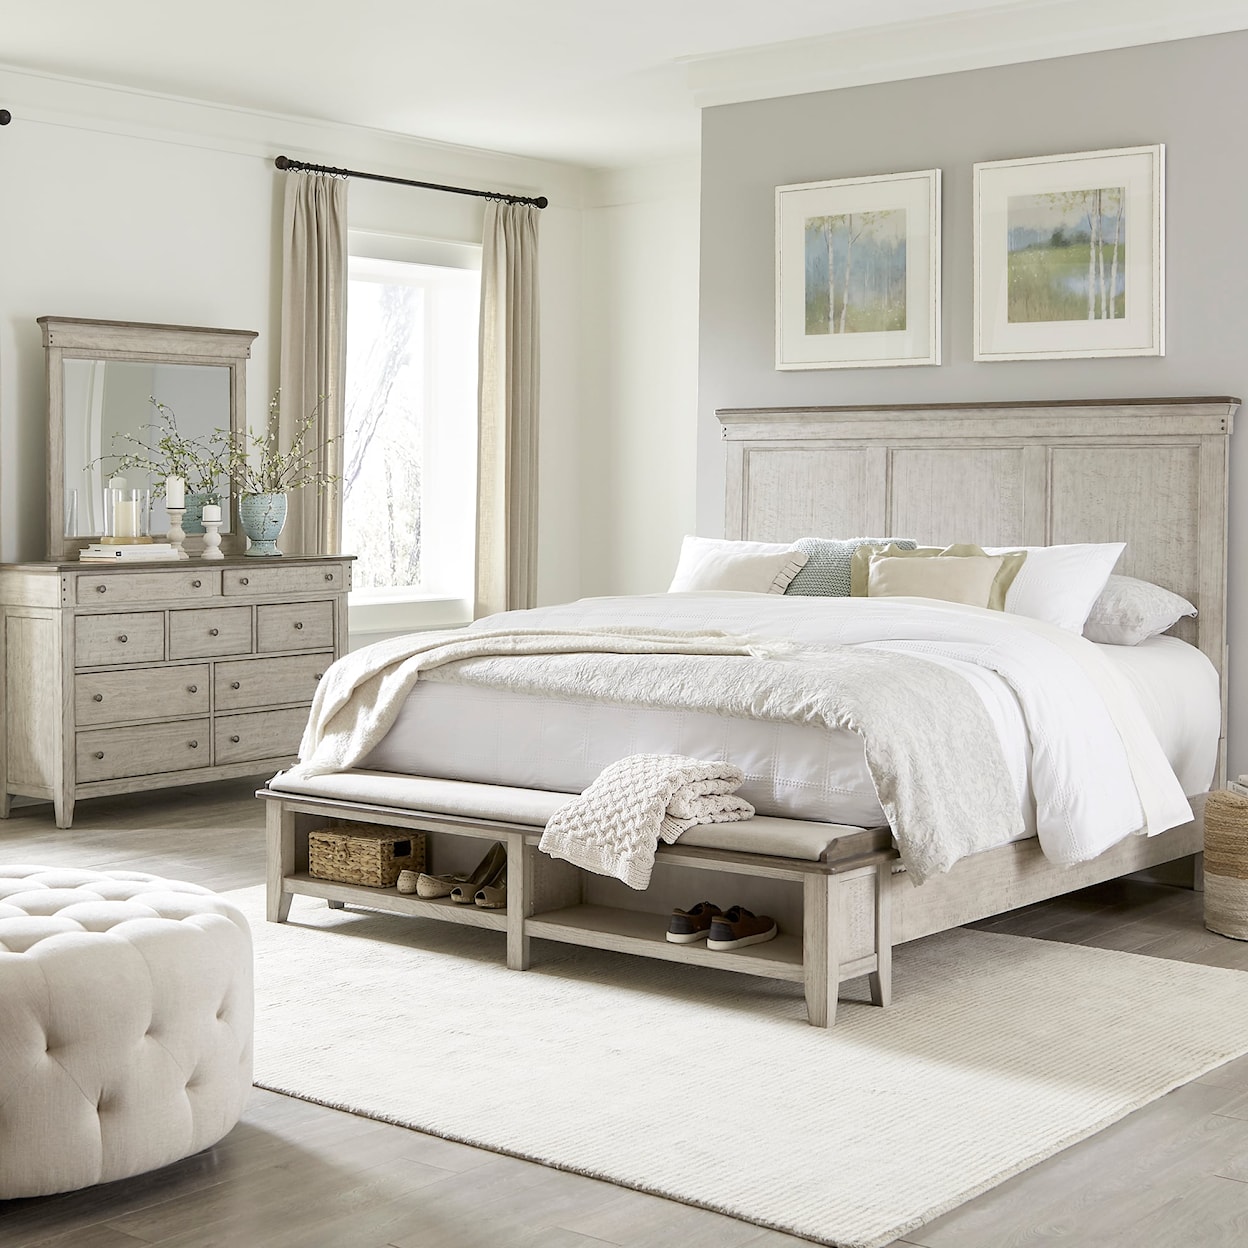 Libby Ivy Hollow 3-Piece King Storage Bedroom Set